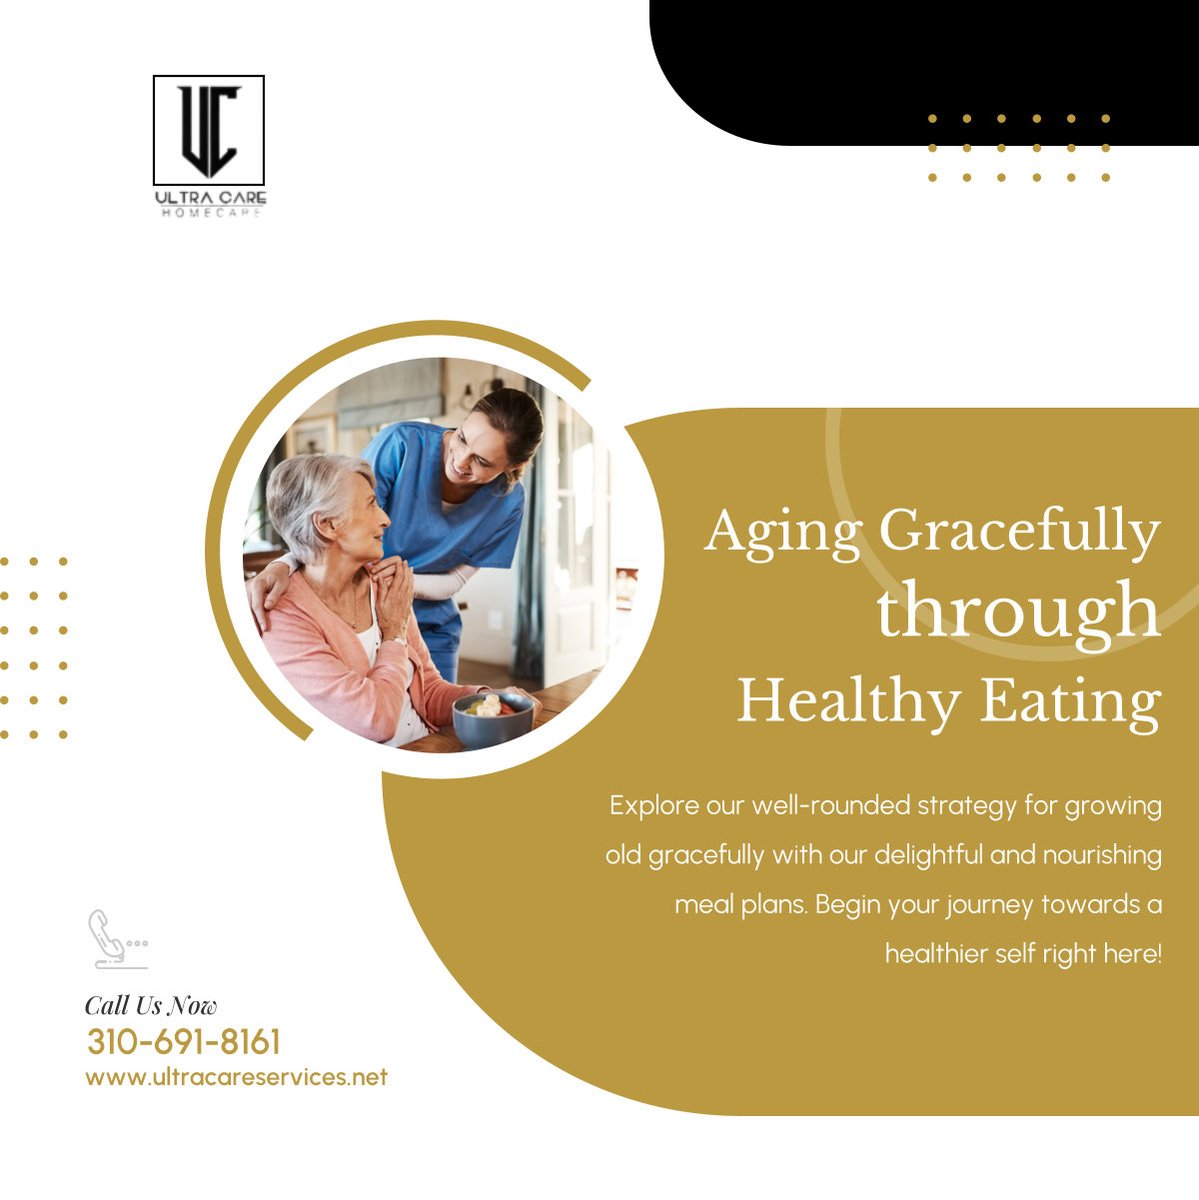 Take control of your aging process, and savor every moment of the journey with our personalized meal plans. Embark on a graceful aging journey powered by the nourishing benefits of healthy eating.

#HomeCare #HealthyEating #LosAngelesCA #AgingGracefully #MealPlans